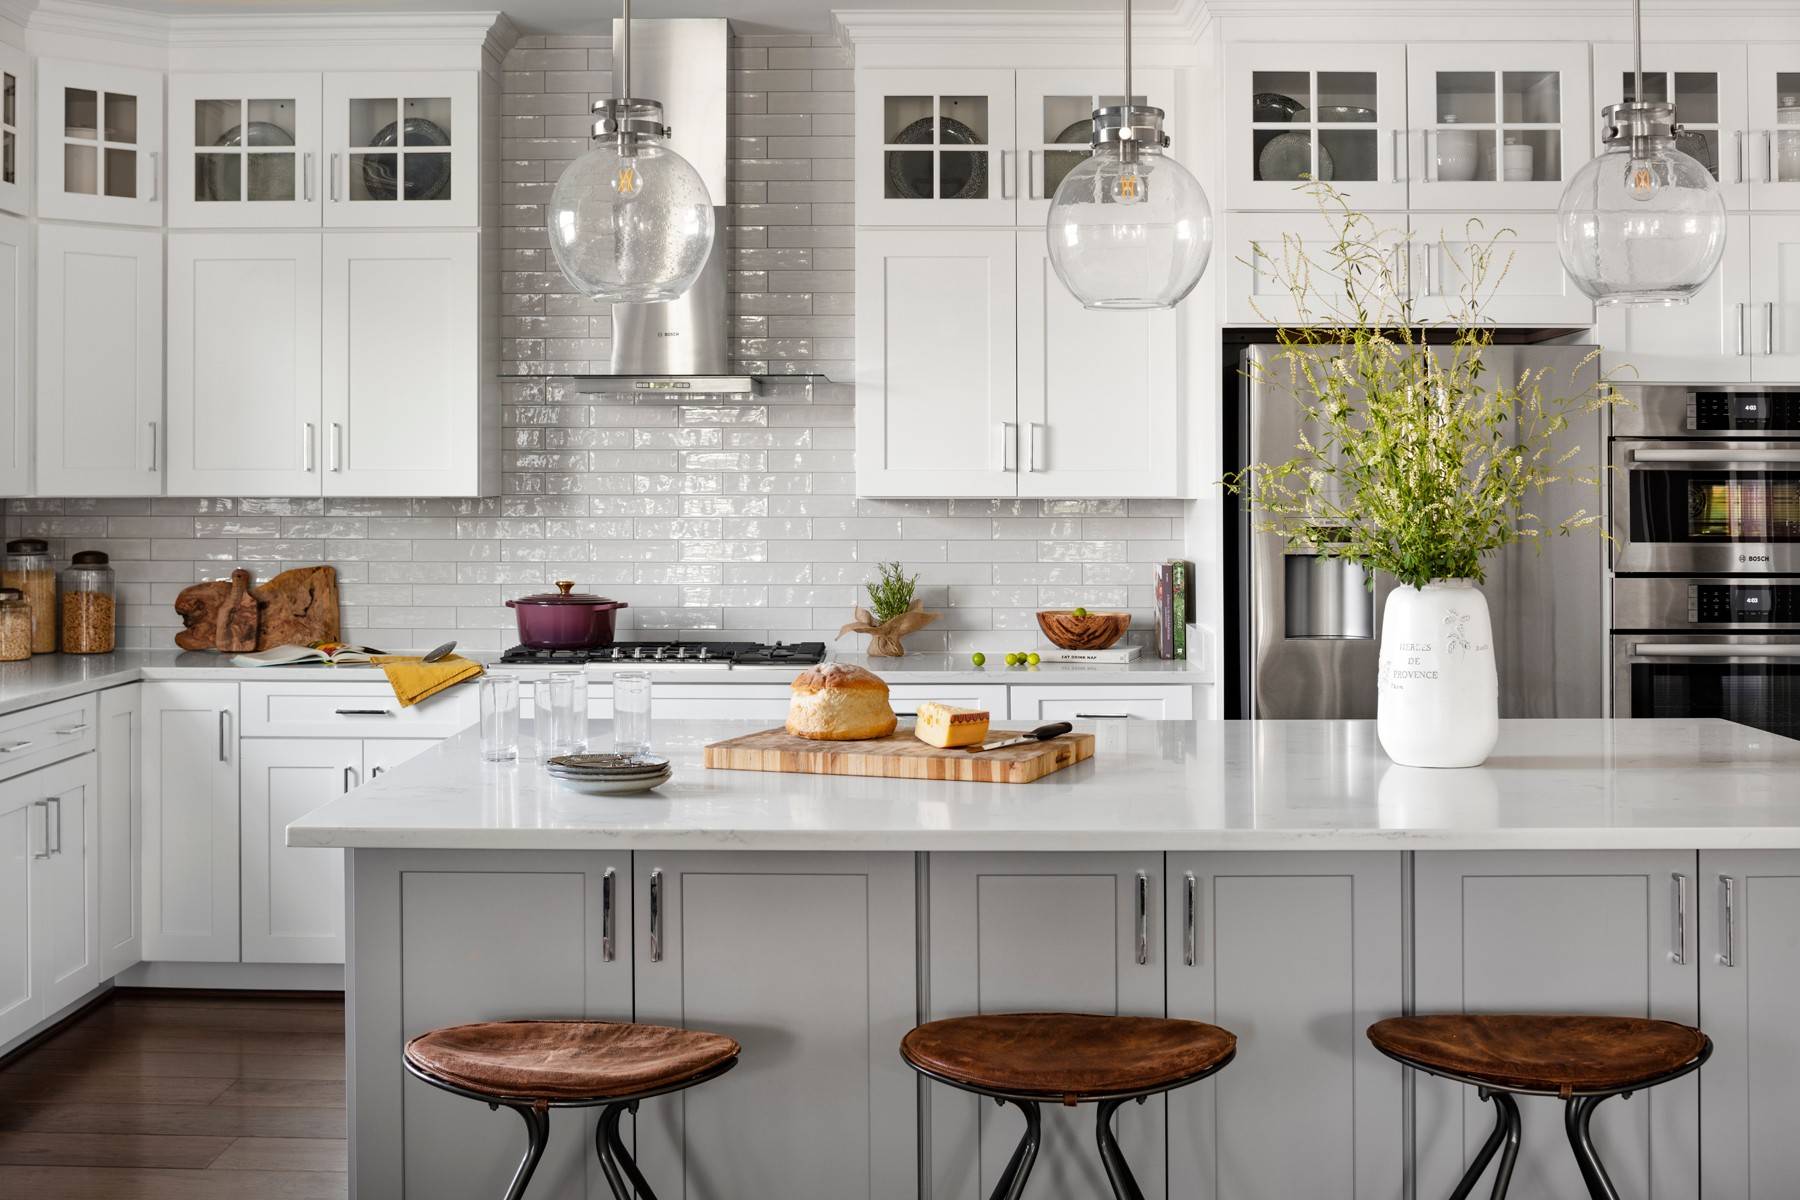 Modern farmhouse kitchen with a touch of coziness (from Houzz)